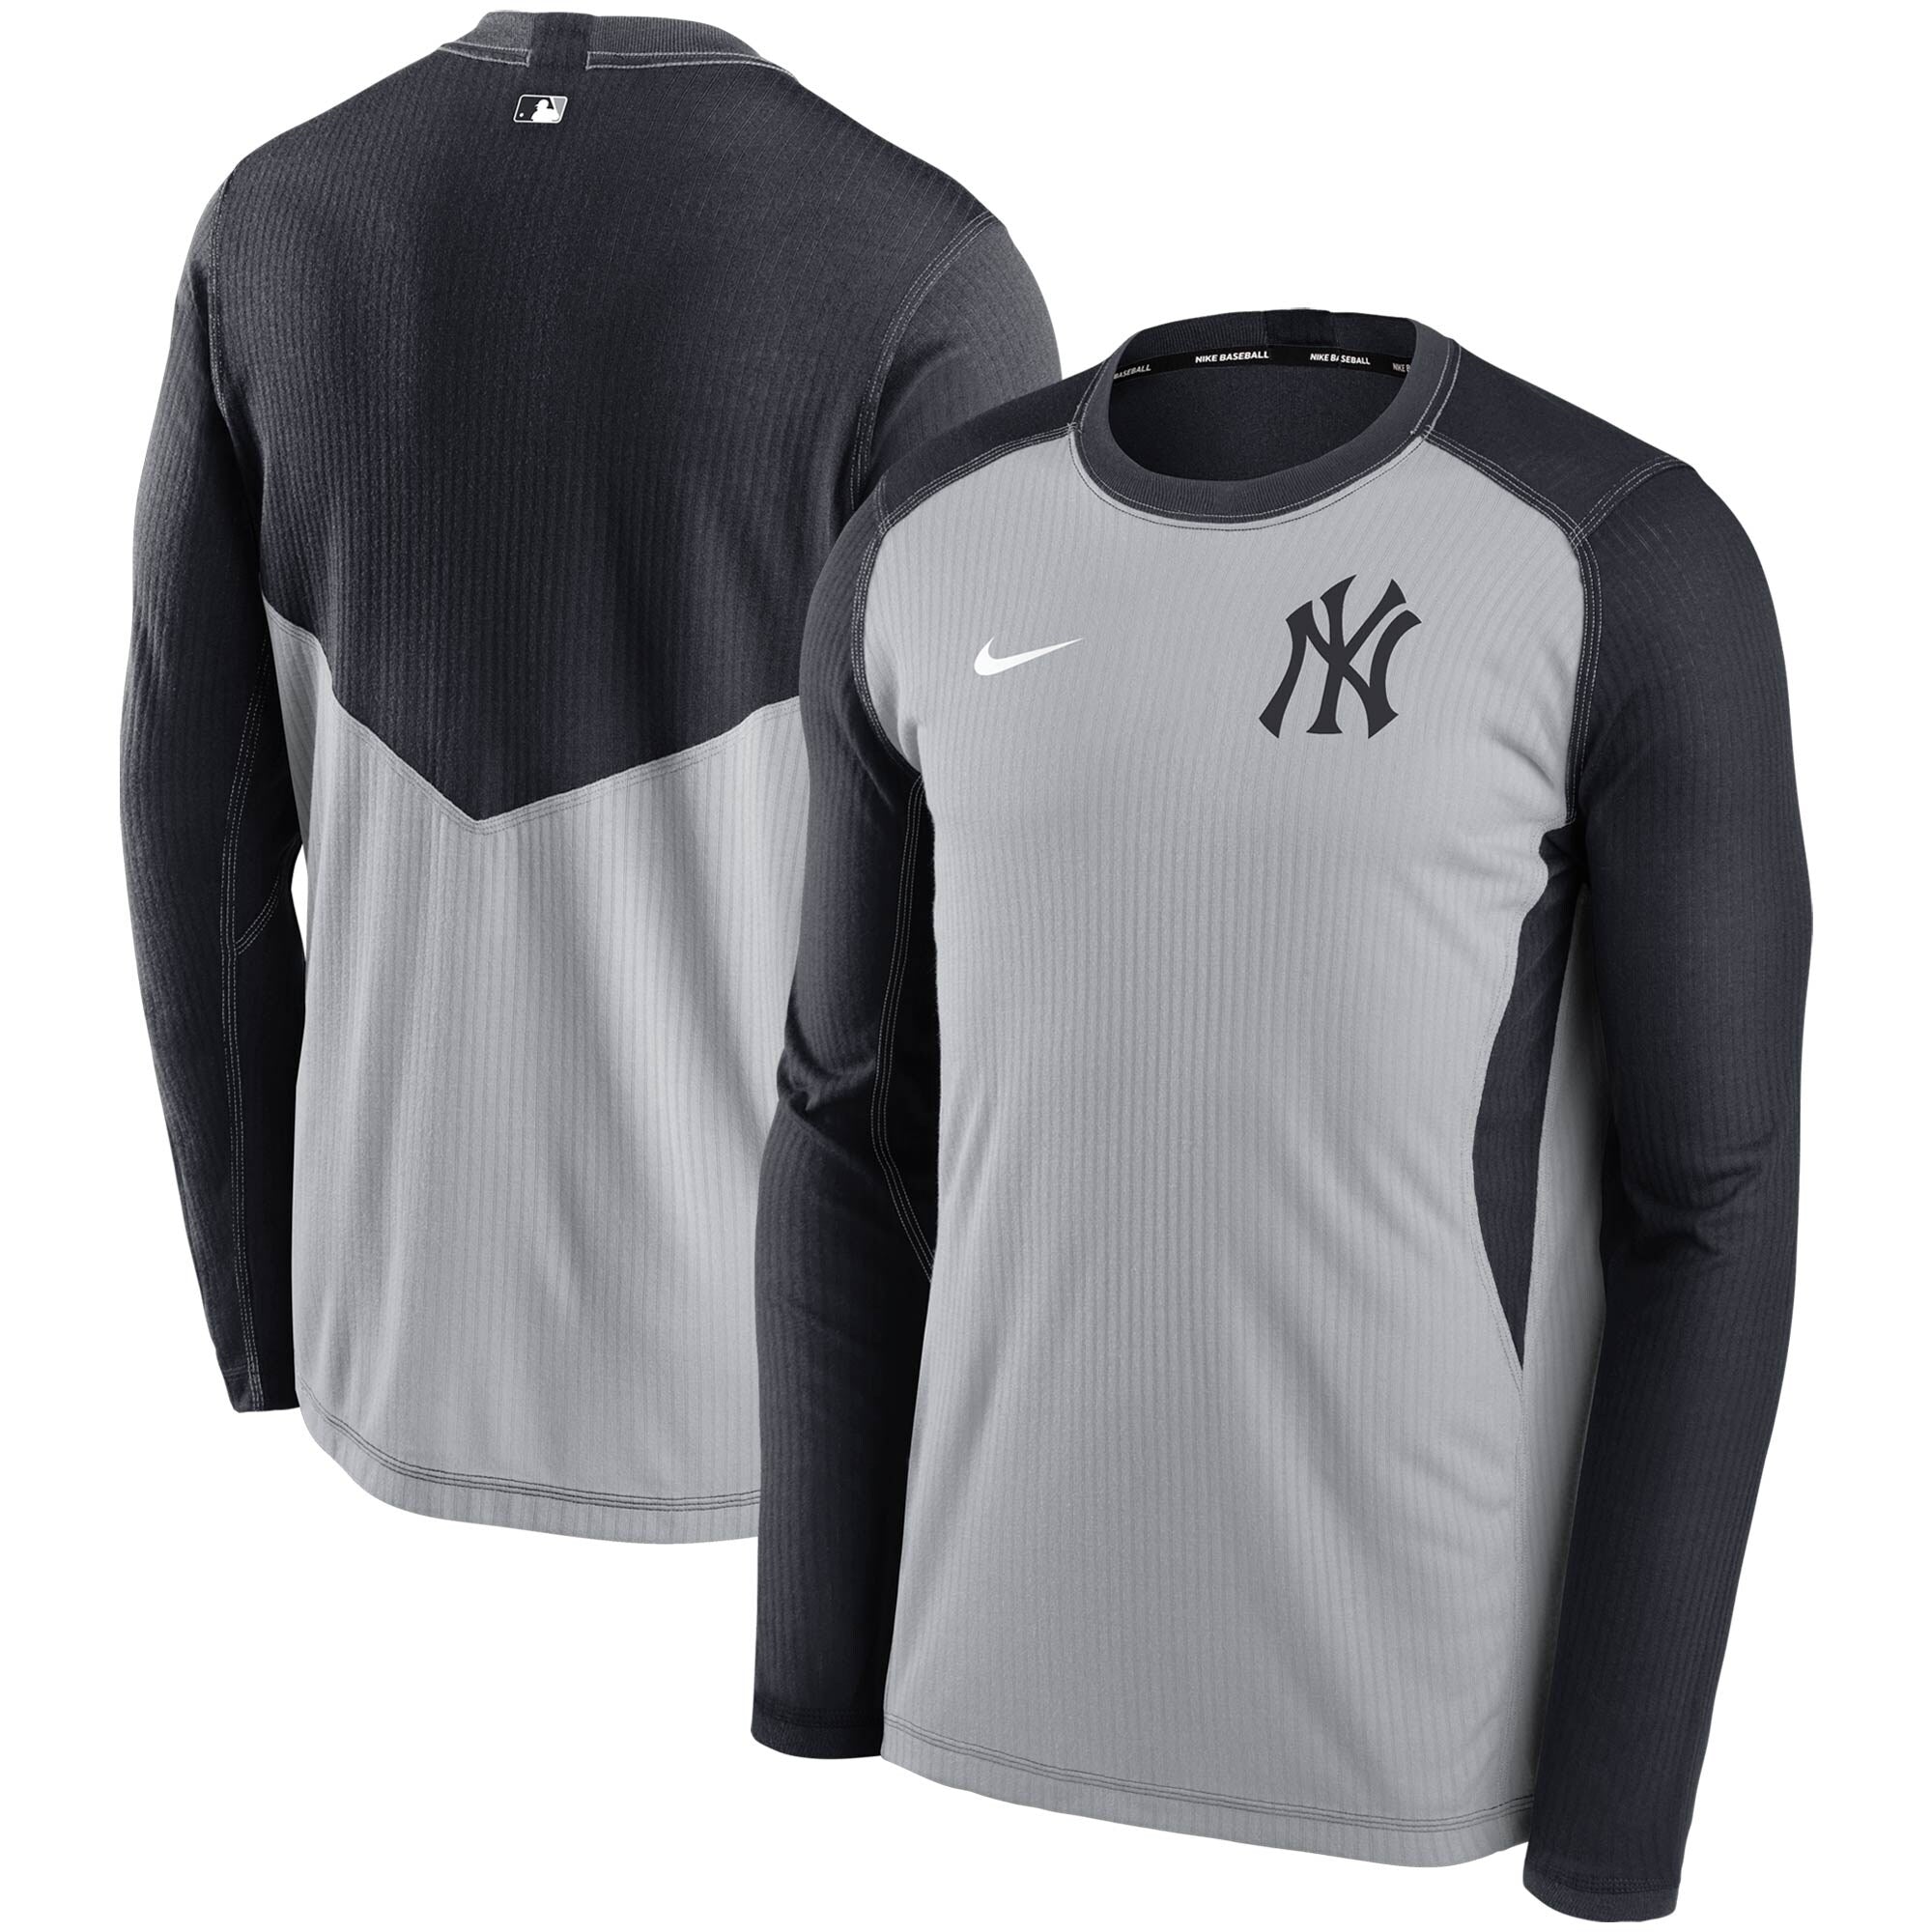 Men's Nike Yankees Grey & Navy Authentic Collection Thermal Crew Perfo –  Legends Locker